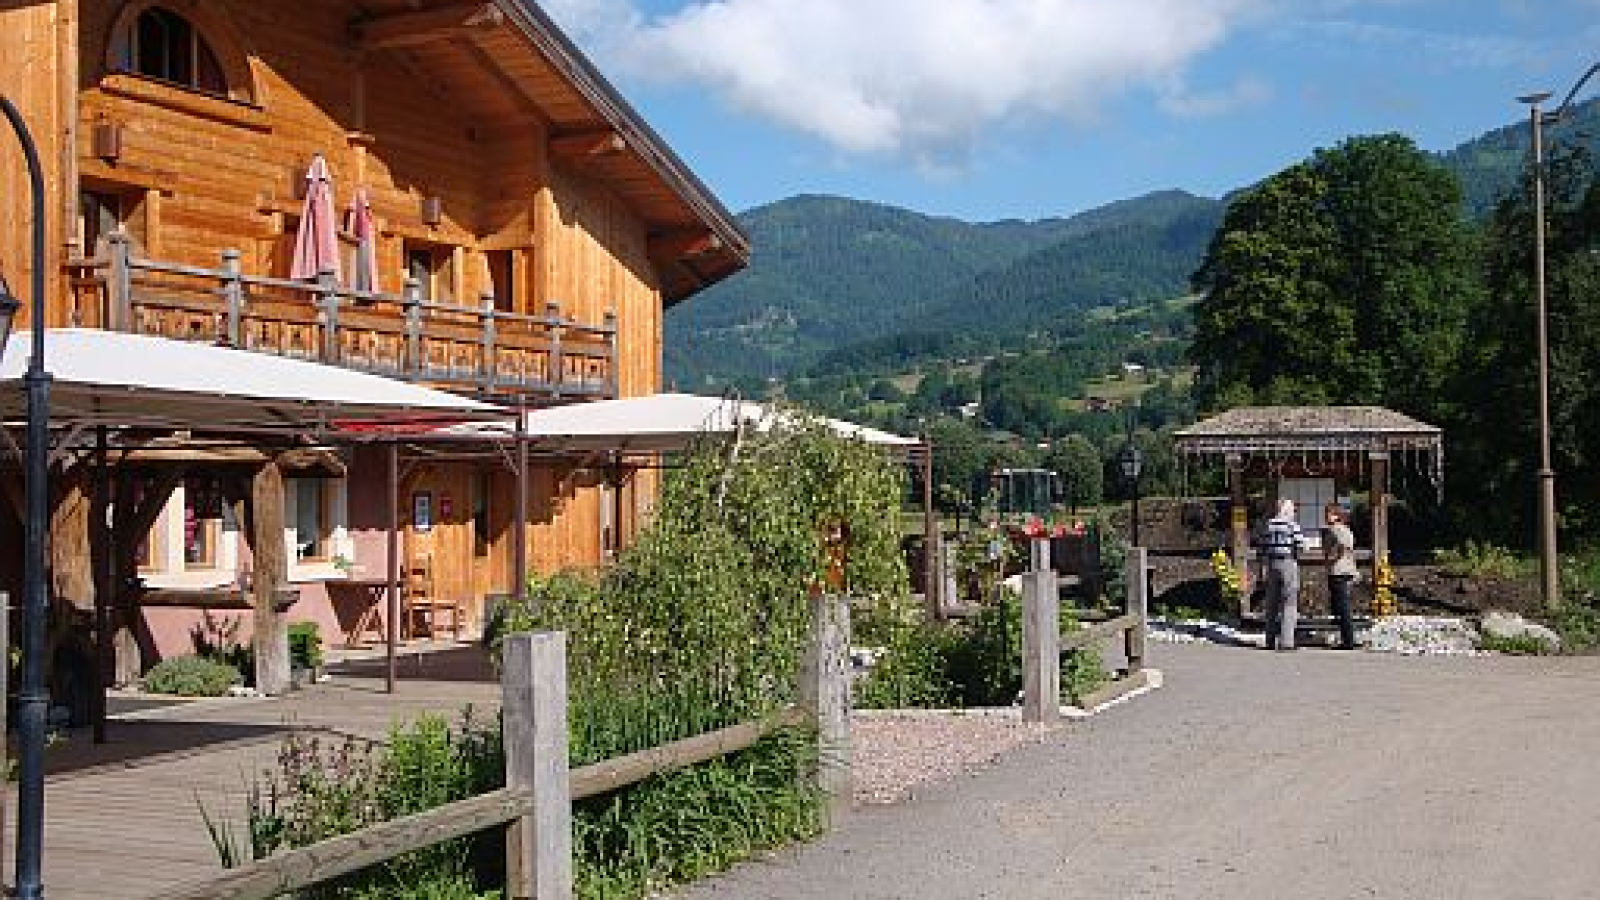 View of the chalet in summer